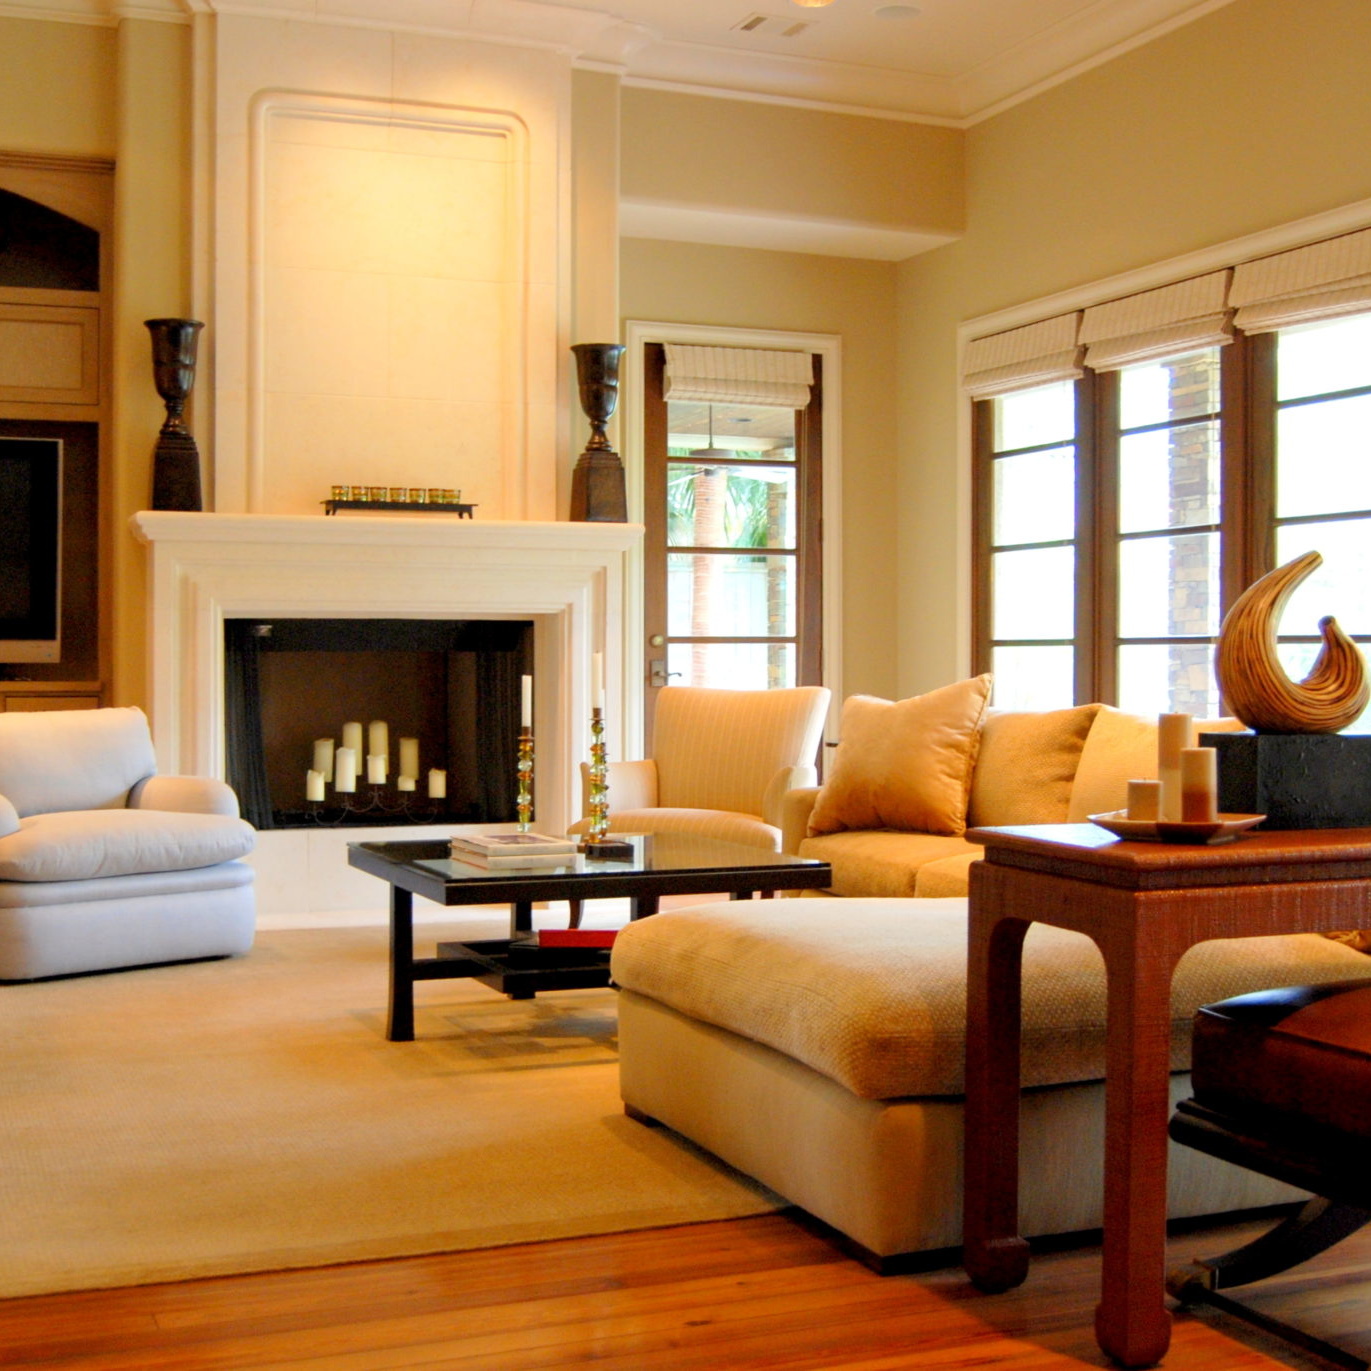 Living room interior design with fireplace and large open windows